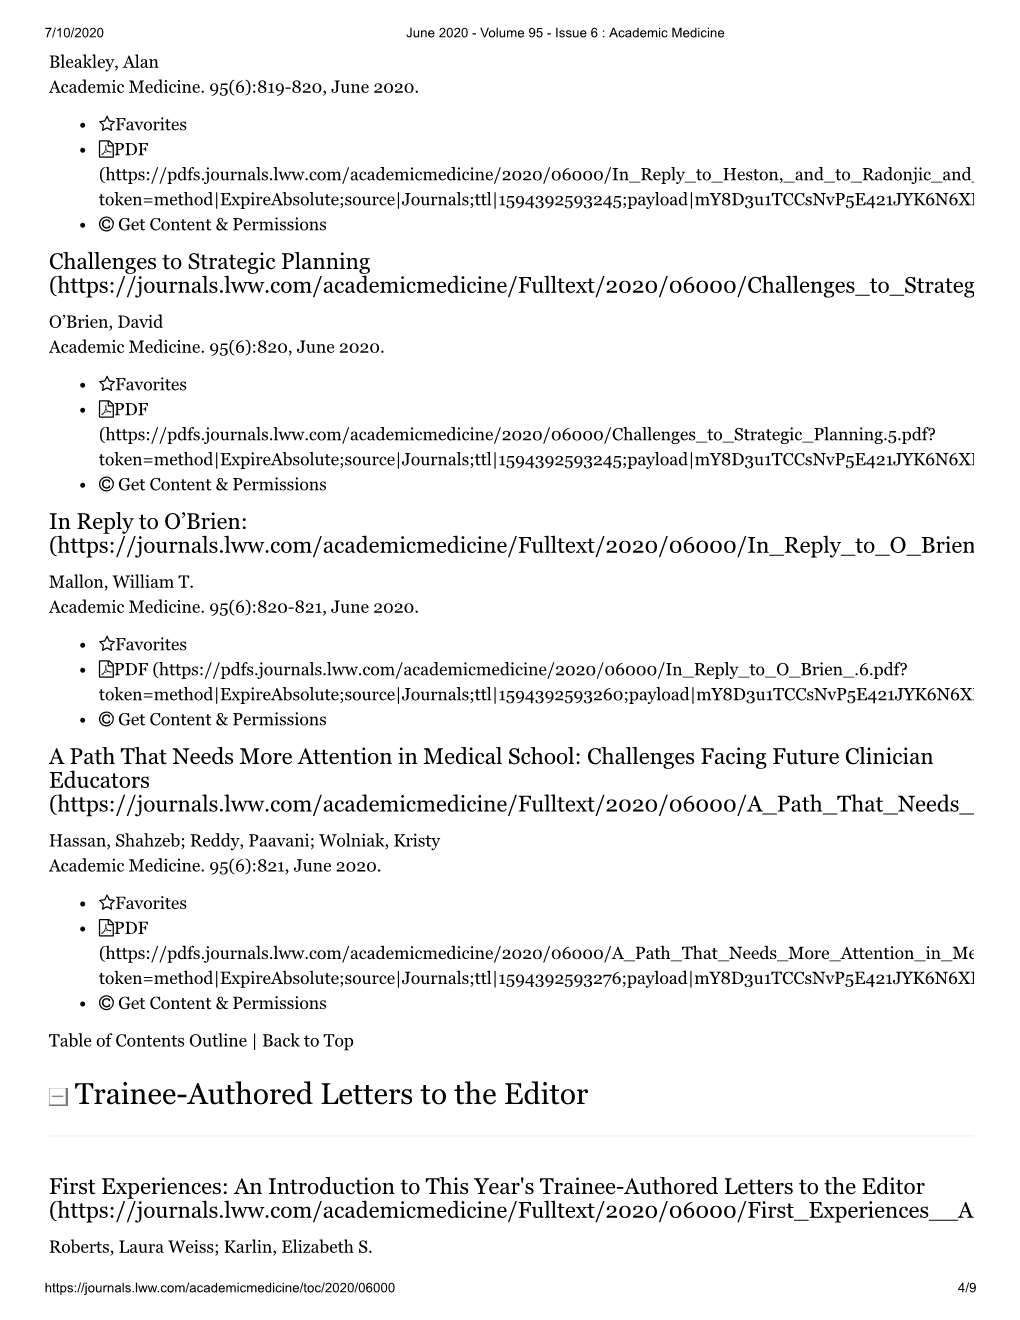 Trainee-Authored Letters to the Editor